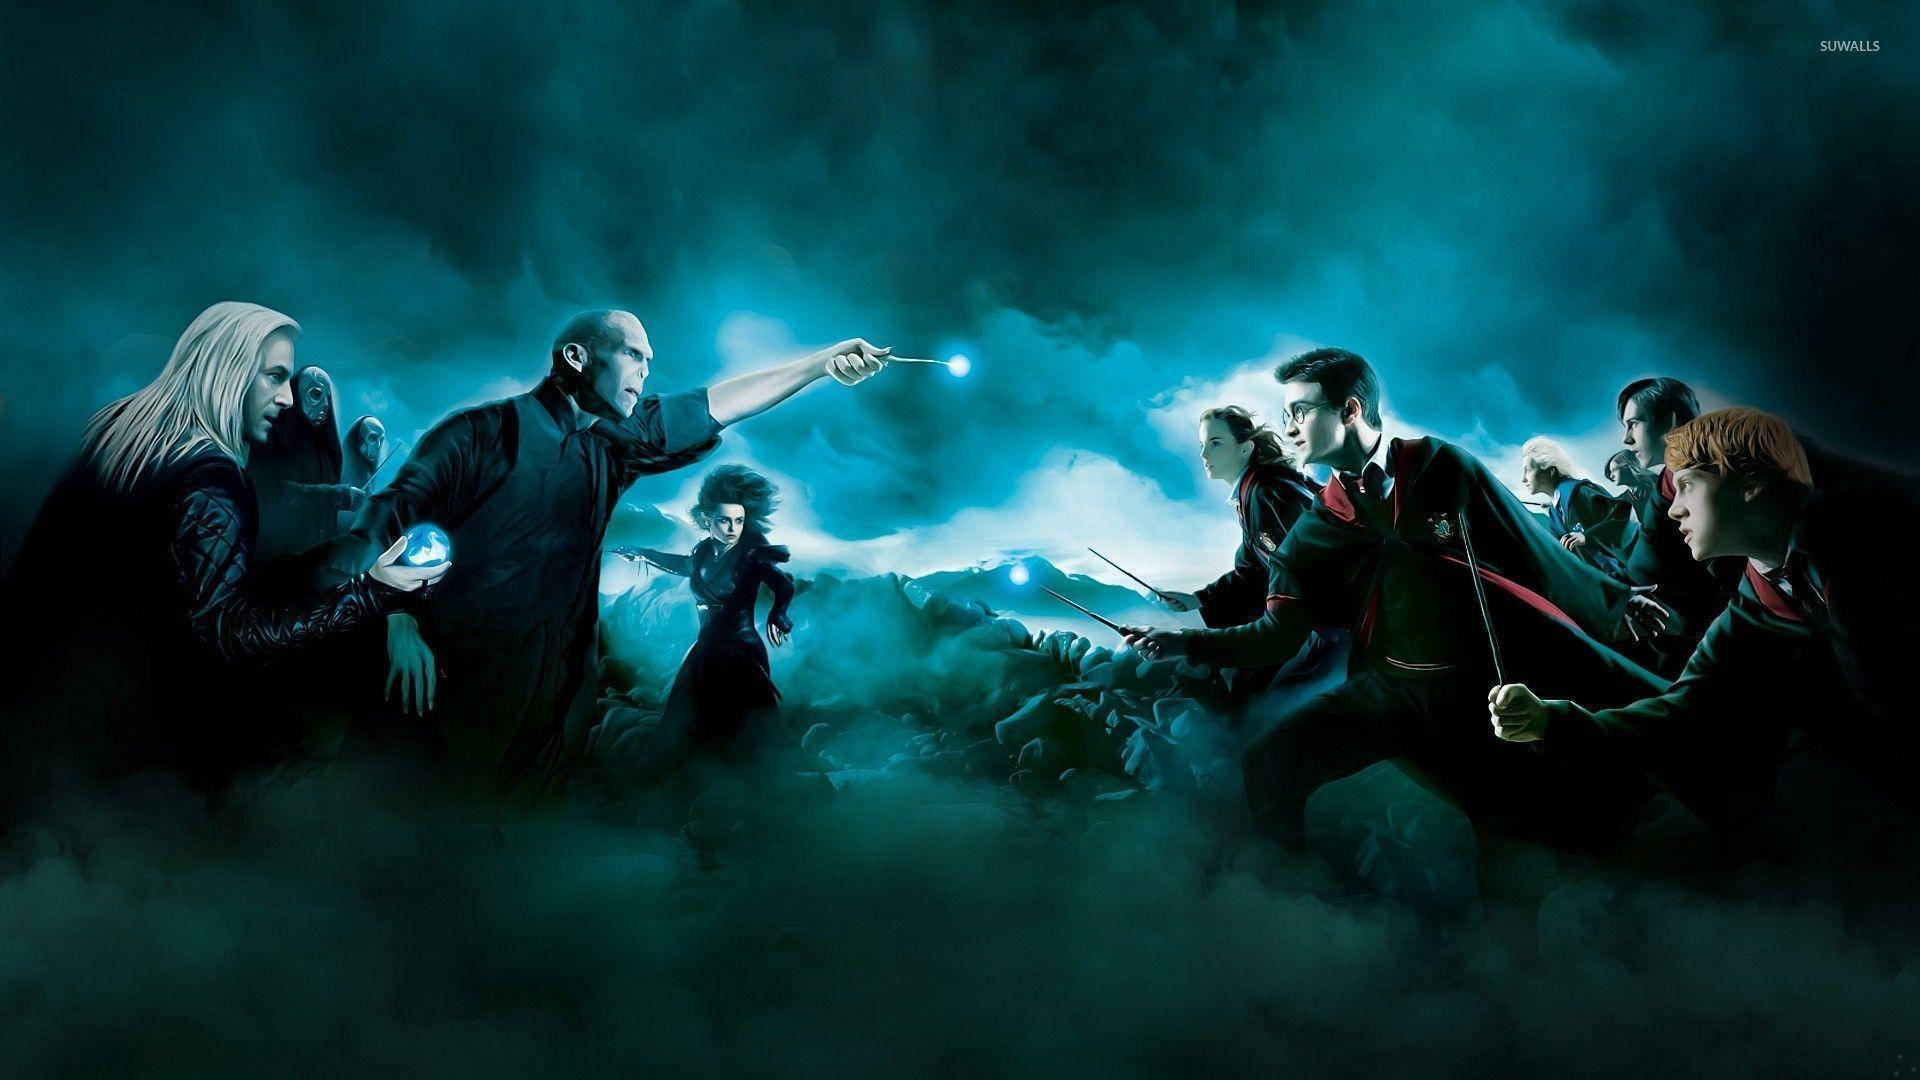 Gryffindor Students Against Death Eaters Wallpaper